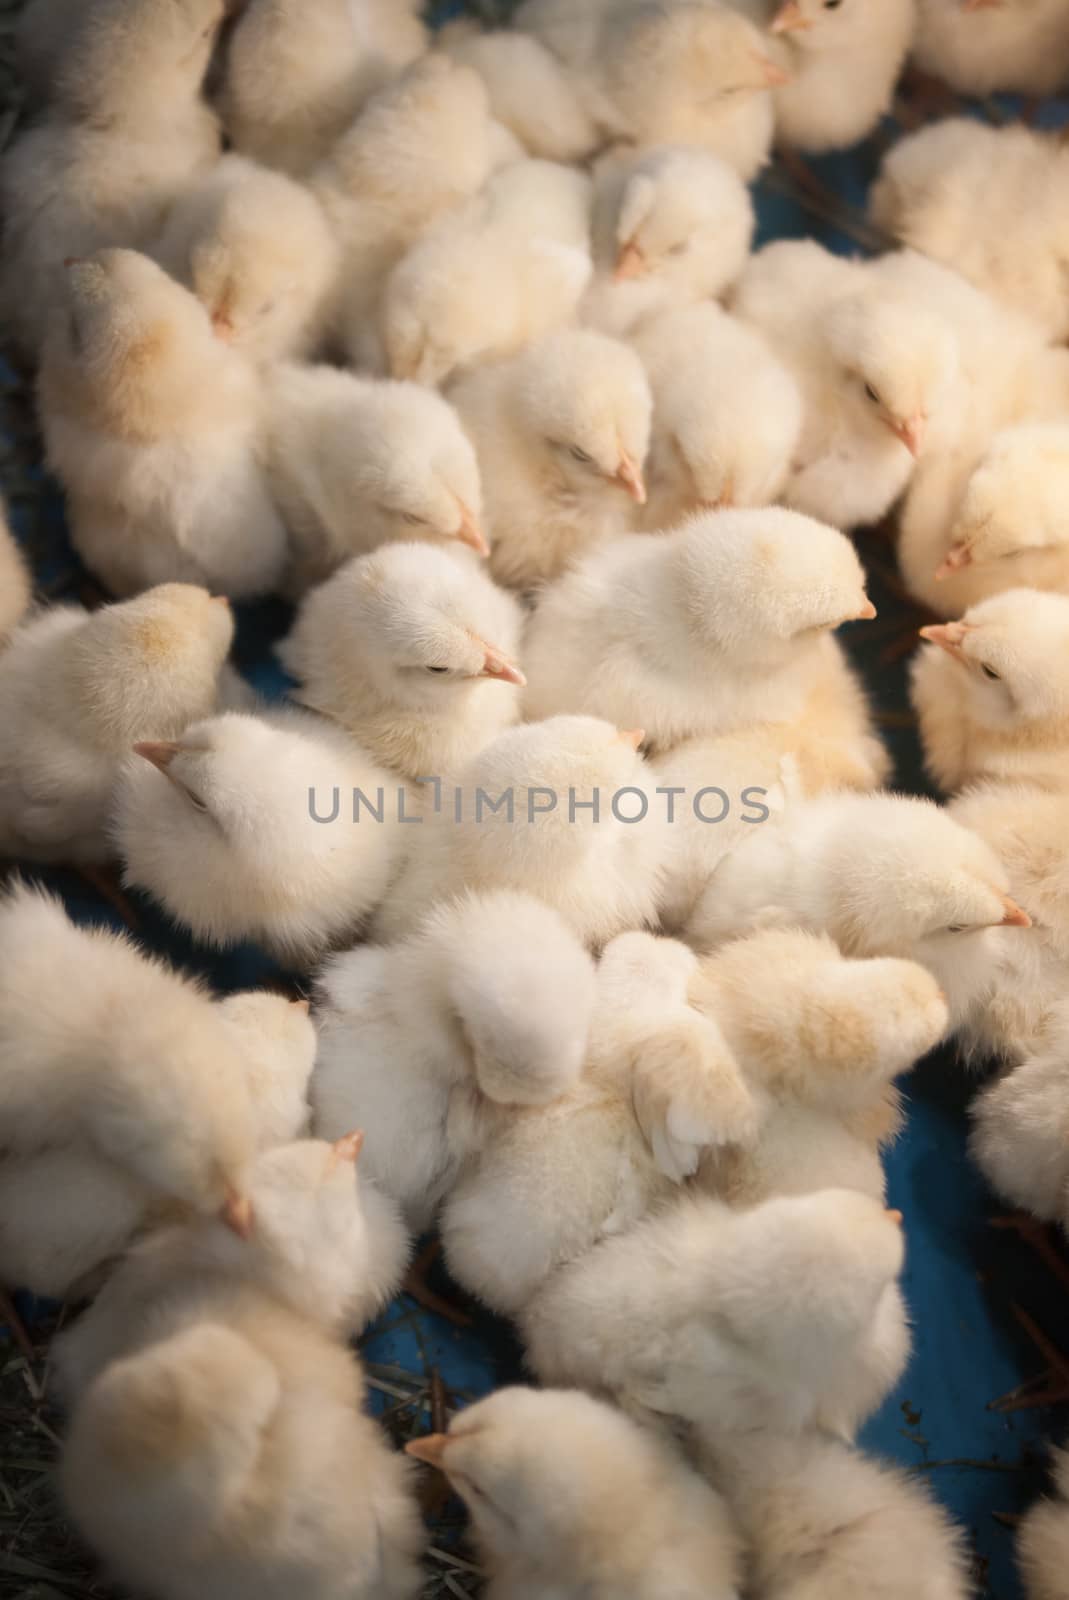 Large group of baby chicks in chicken farm